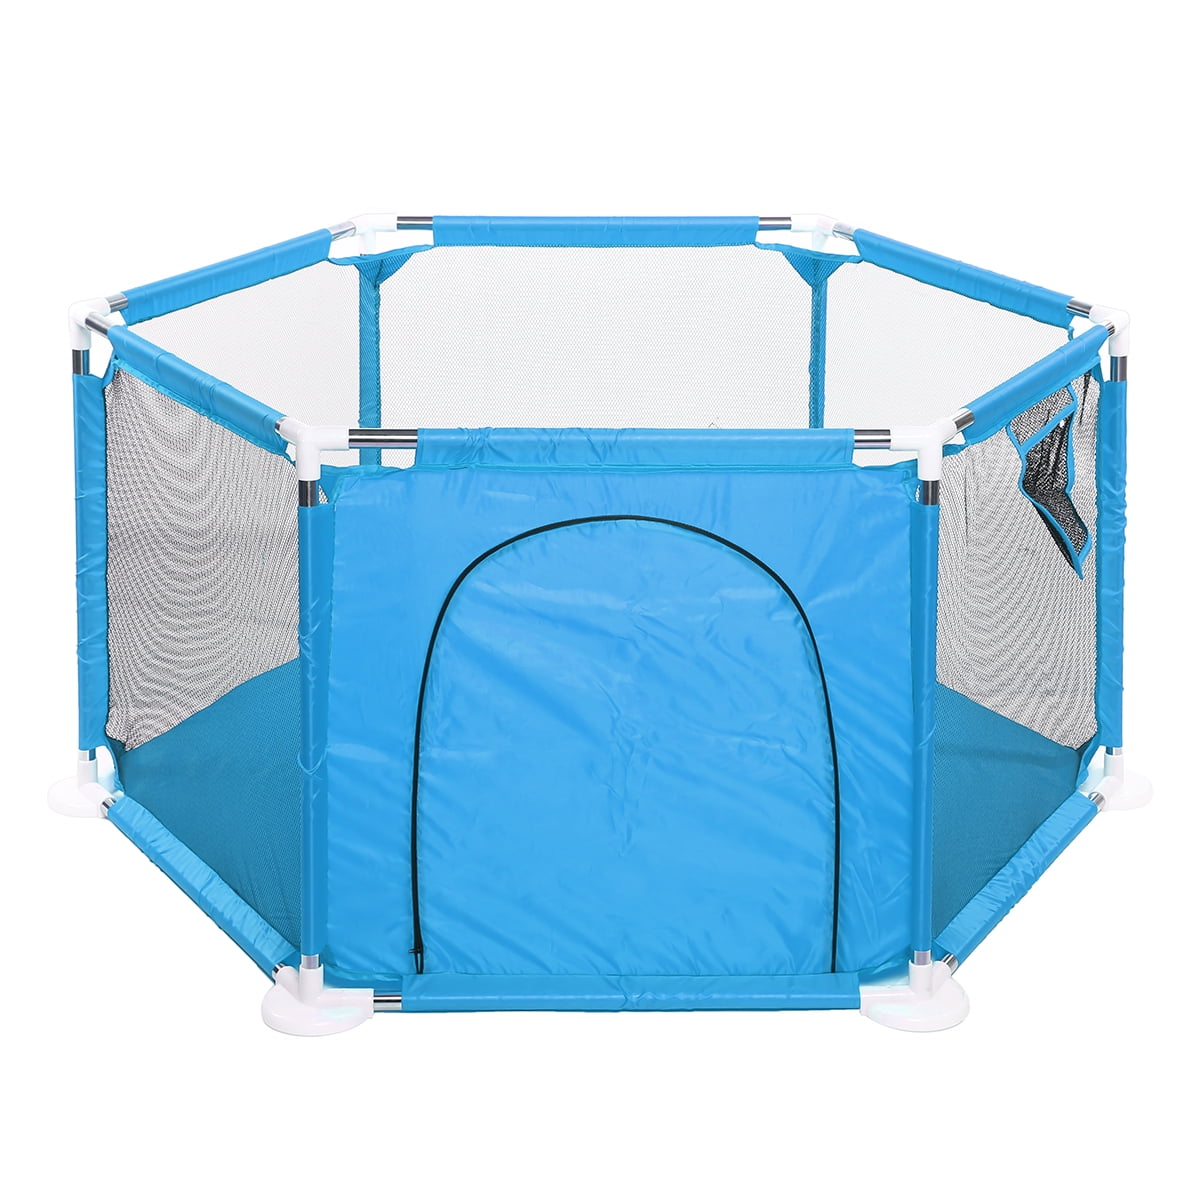 light blue MAYQMAY Baby Playpen Hexagon Playyard for Toddlers with Anti-Slip Base and anti-collision strip Sturdy Safety Kids Activity Centre Safety Play Yard with Super Soft Breathable Mesh Kids Fence for Infants